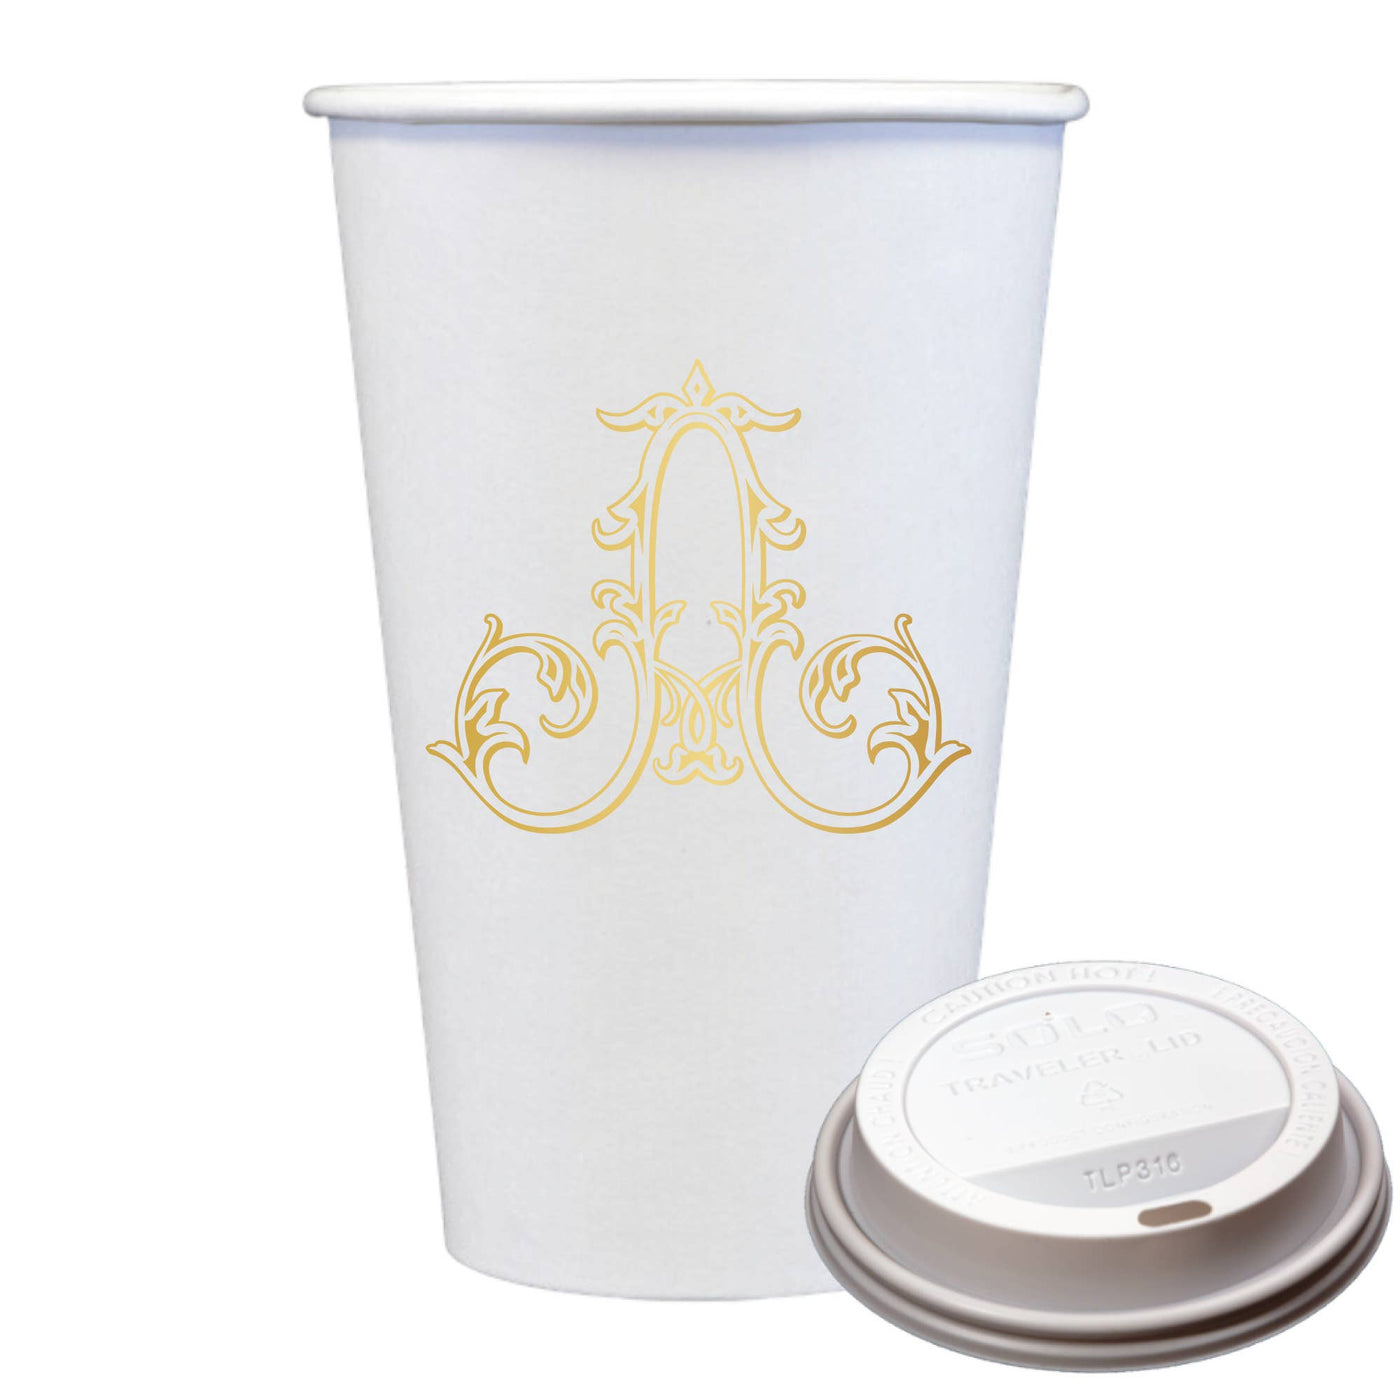 Initial Monogrammed Coffee Cups with Lids